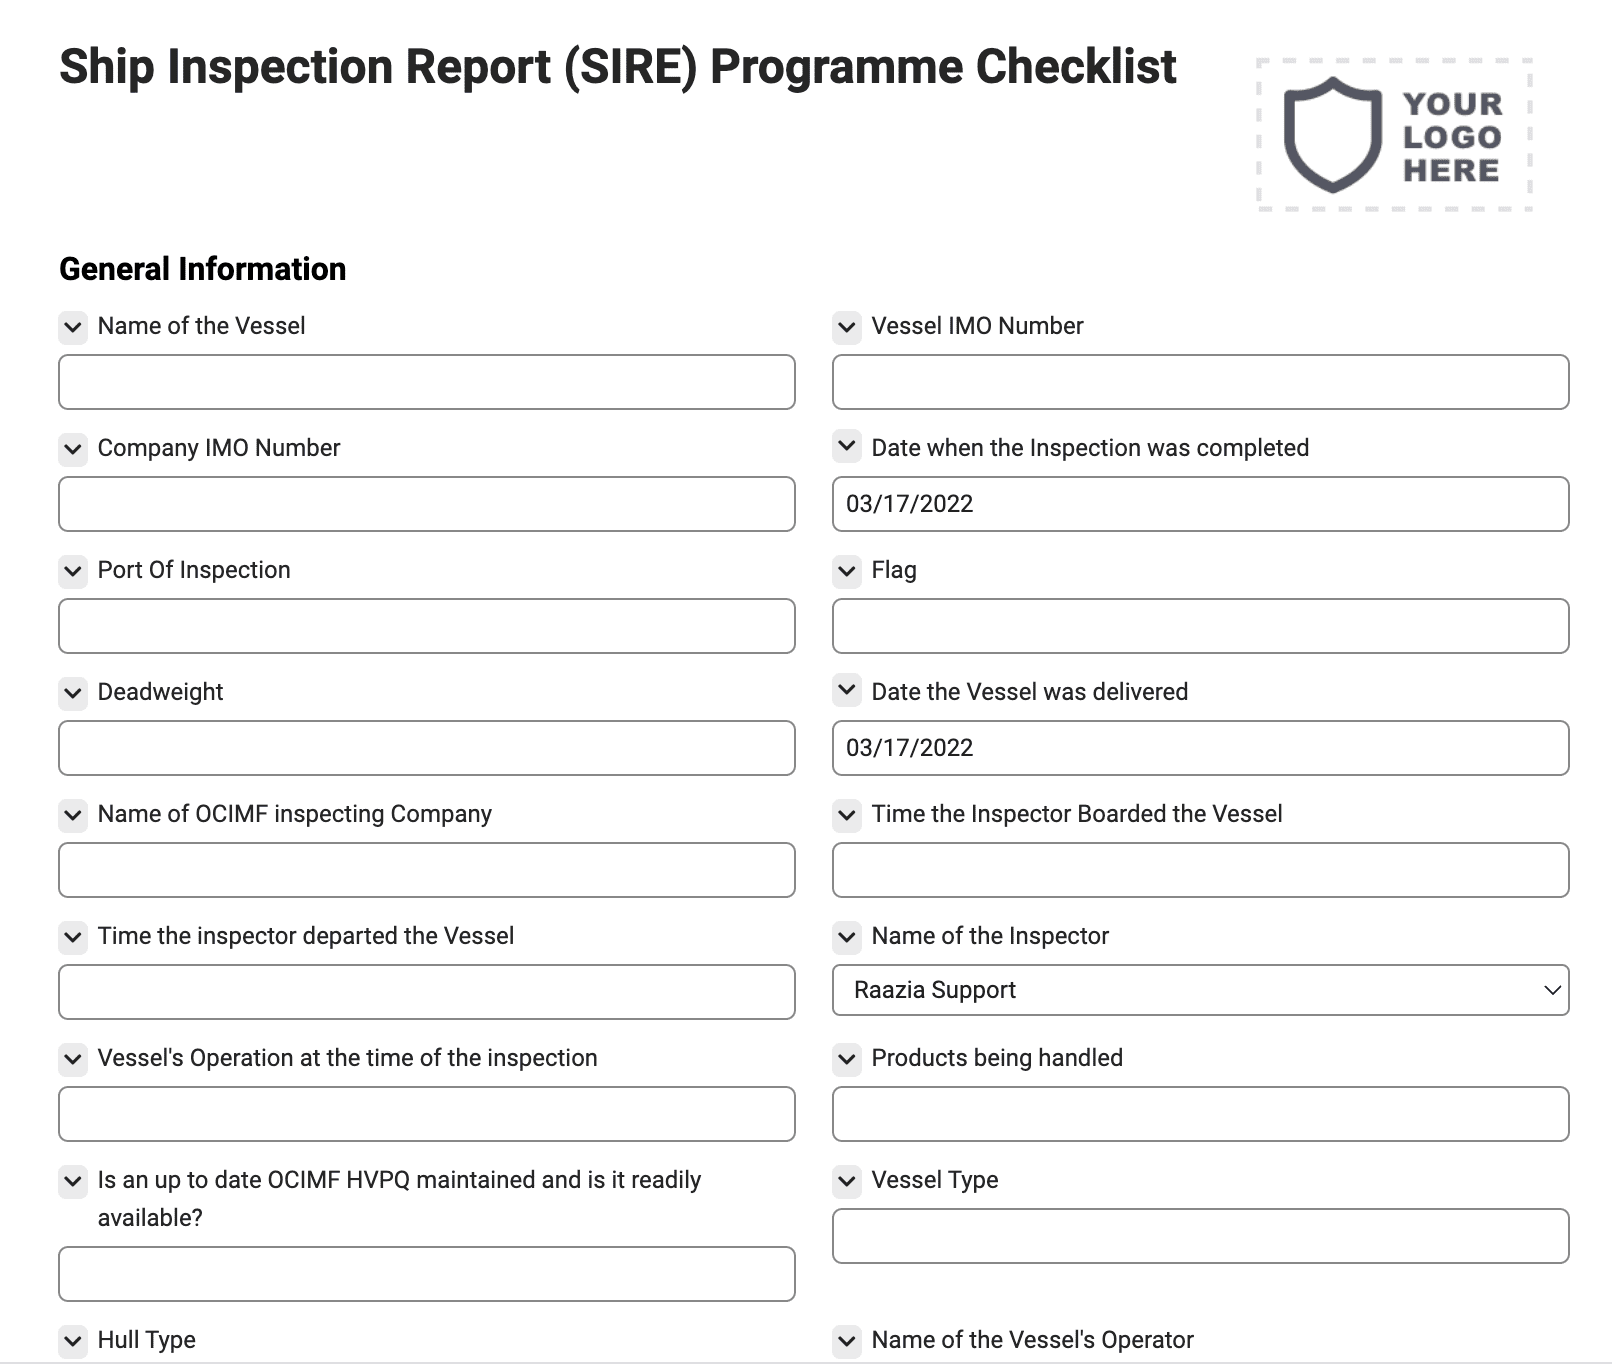 Ship Inspection Report (SIRE) Programme Checklist